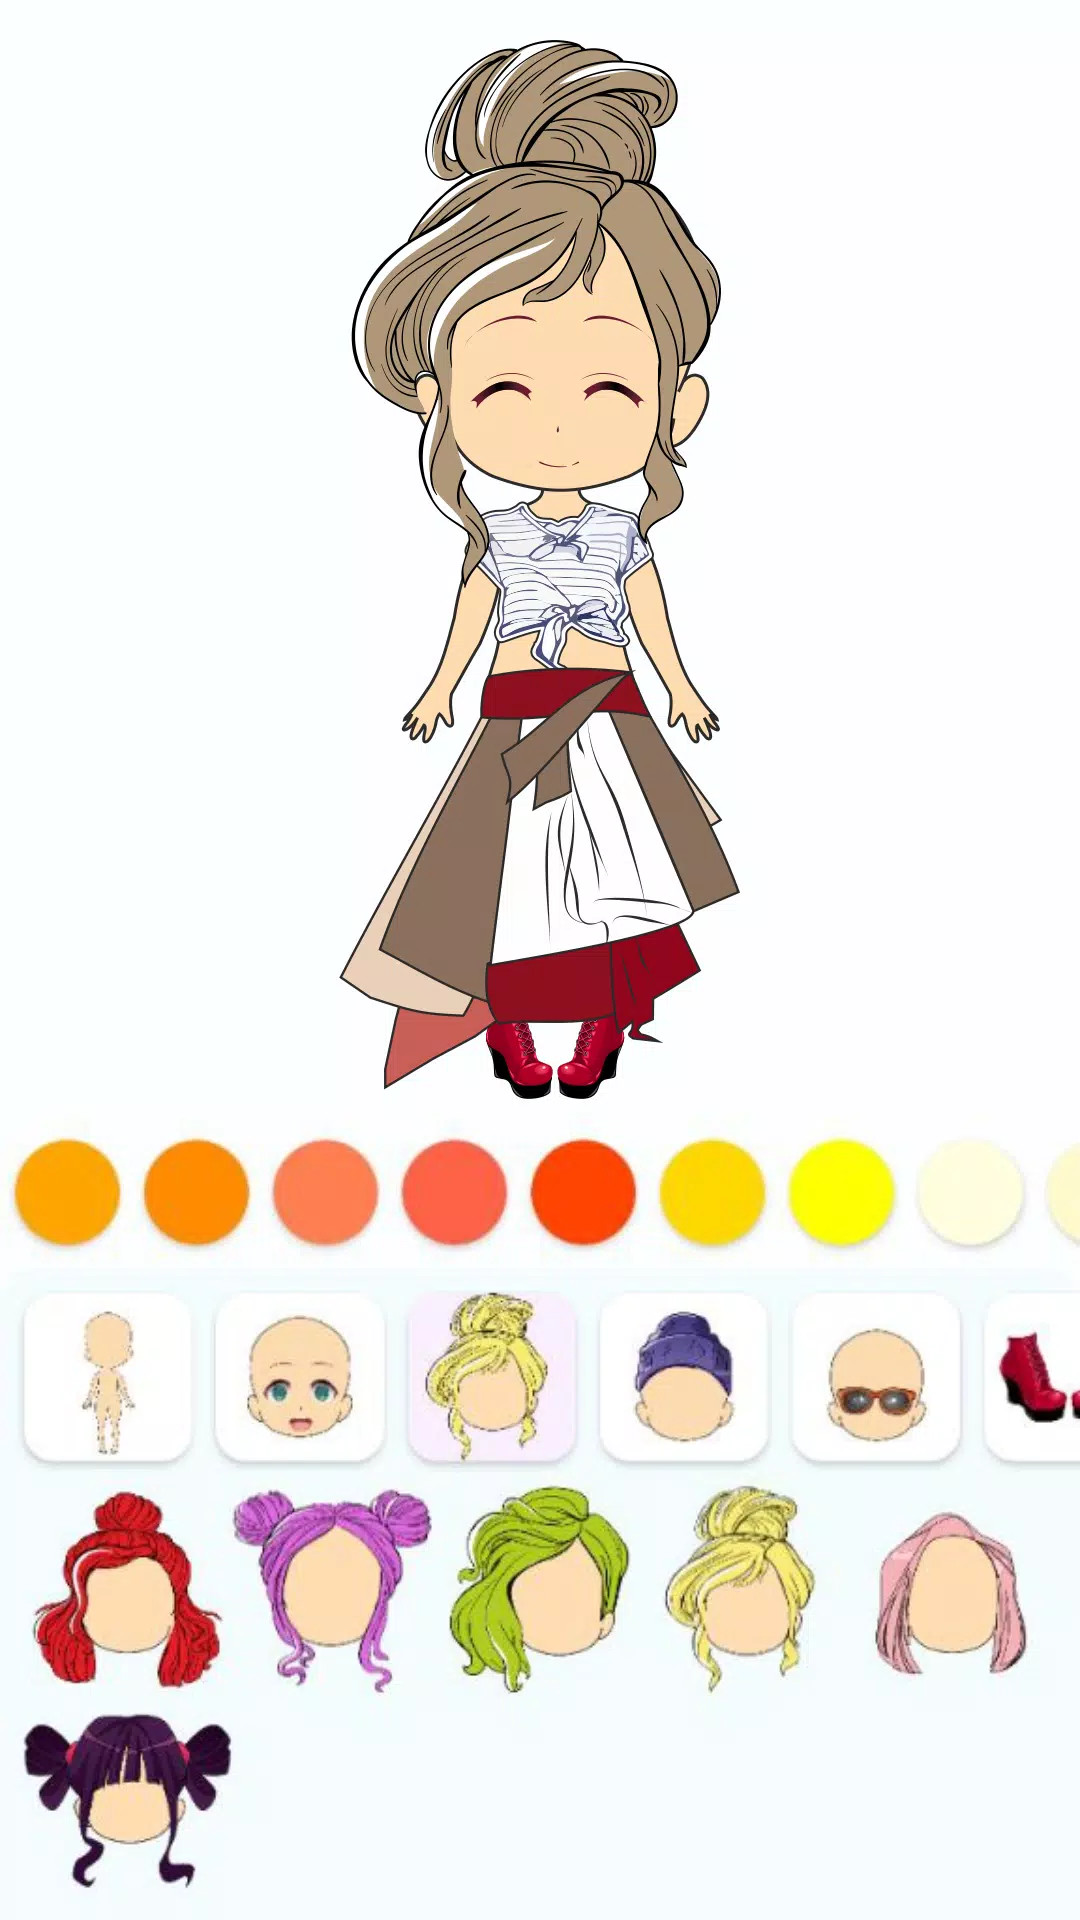 A very basic yet great Avatar Maker ~